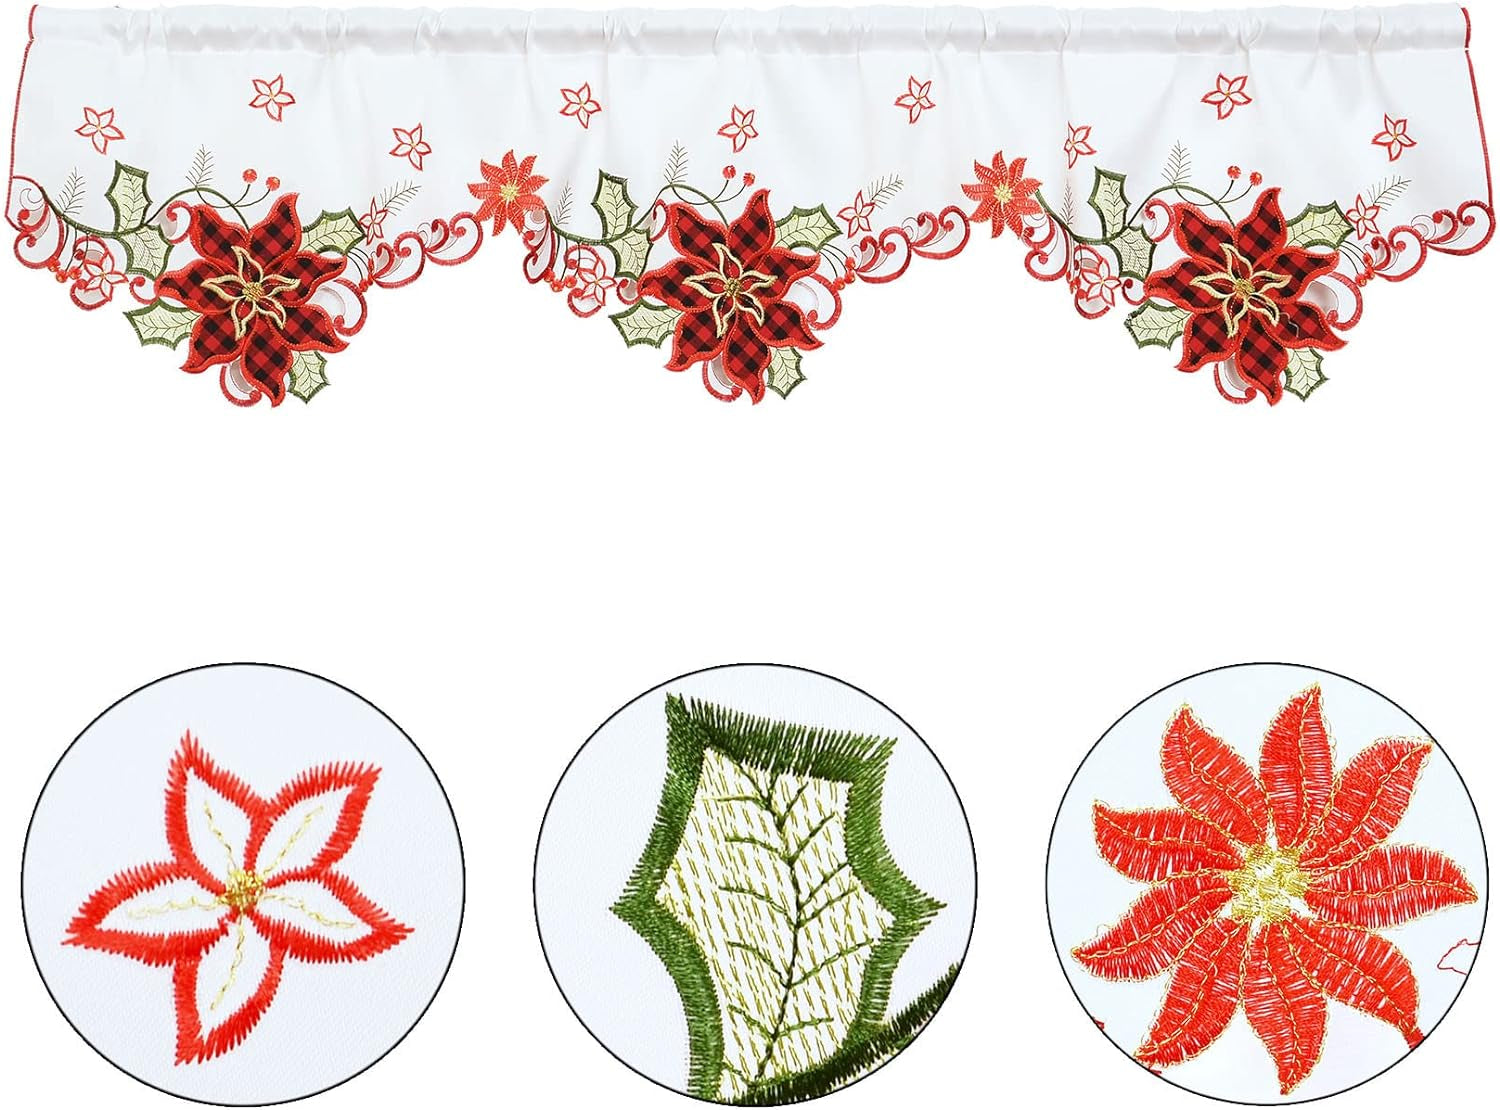 Embroidered Poinsettia Kitchen Window Curtains Valance 58×14 Inches for Christmas Holidays (Poinsettia)